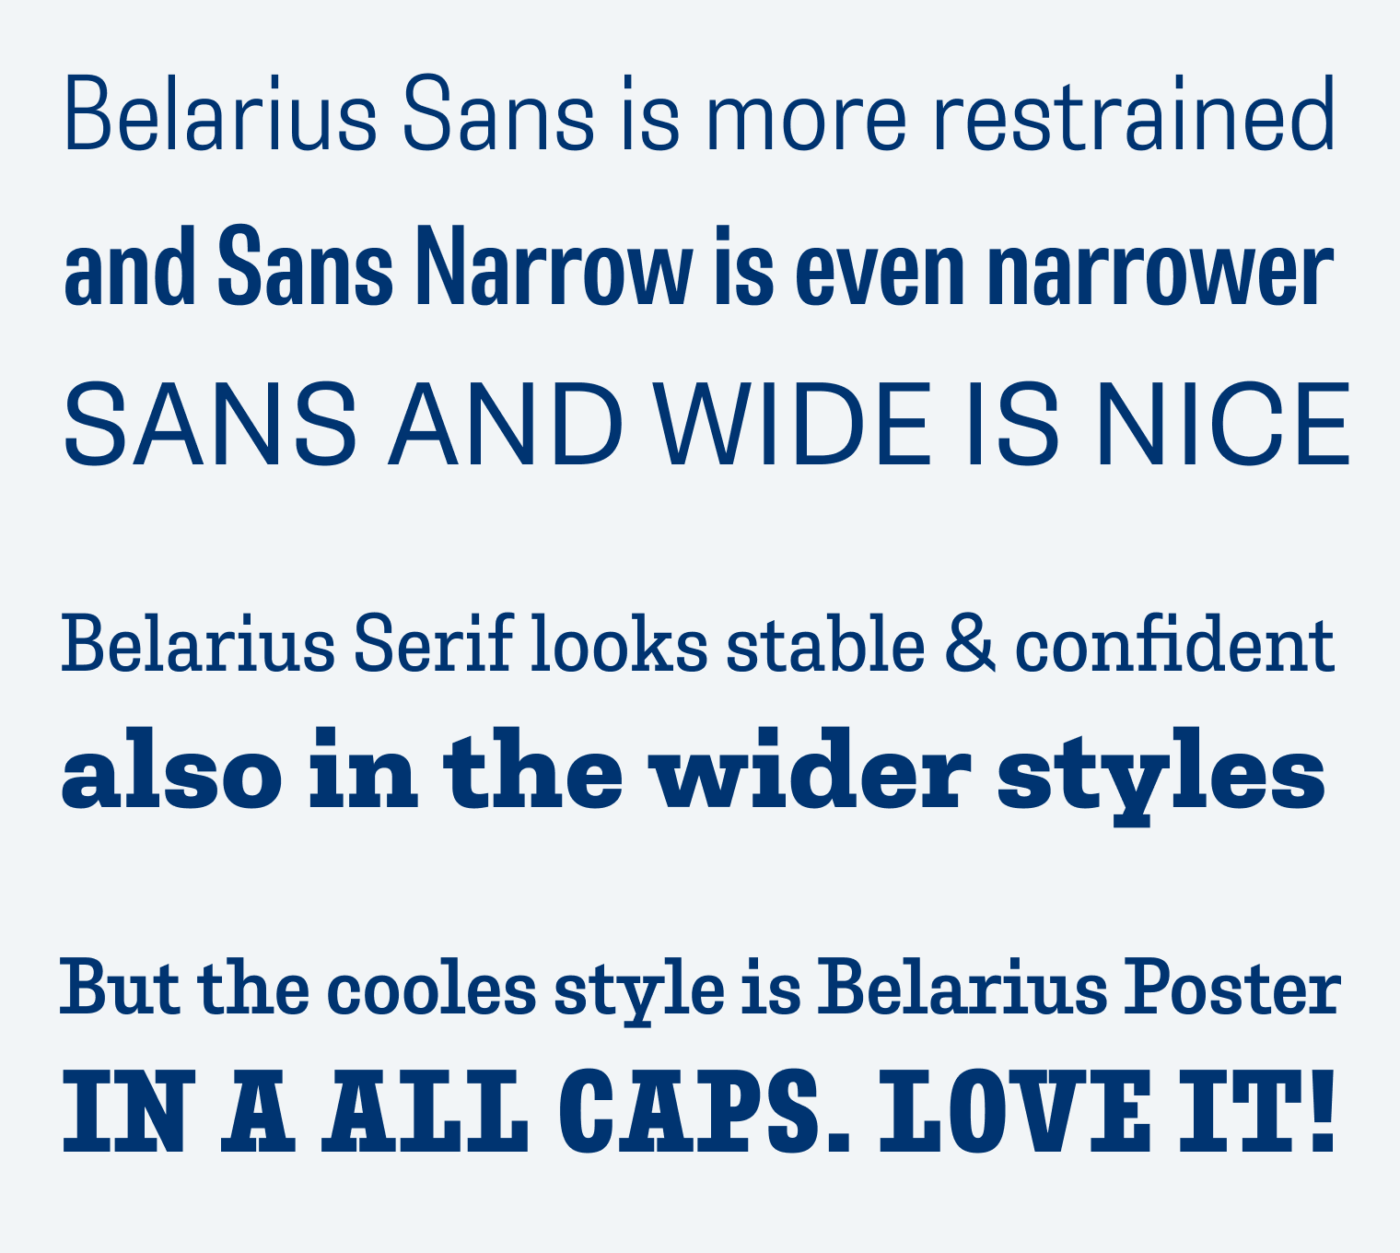 Belarius Sans is more restrained and Sans Narrow is even narrower SANS AND WIDE IS NICE Belarius Serif looks stable & confident also in the wider styles But the cooles style is Belarius Poster IN A ALL CAPS. LOVE IT!